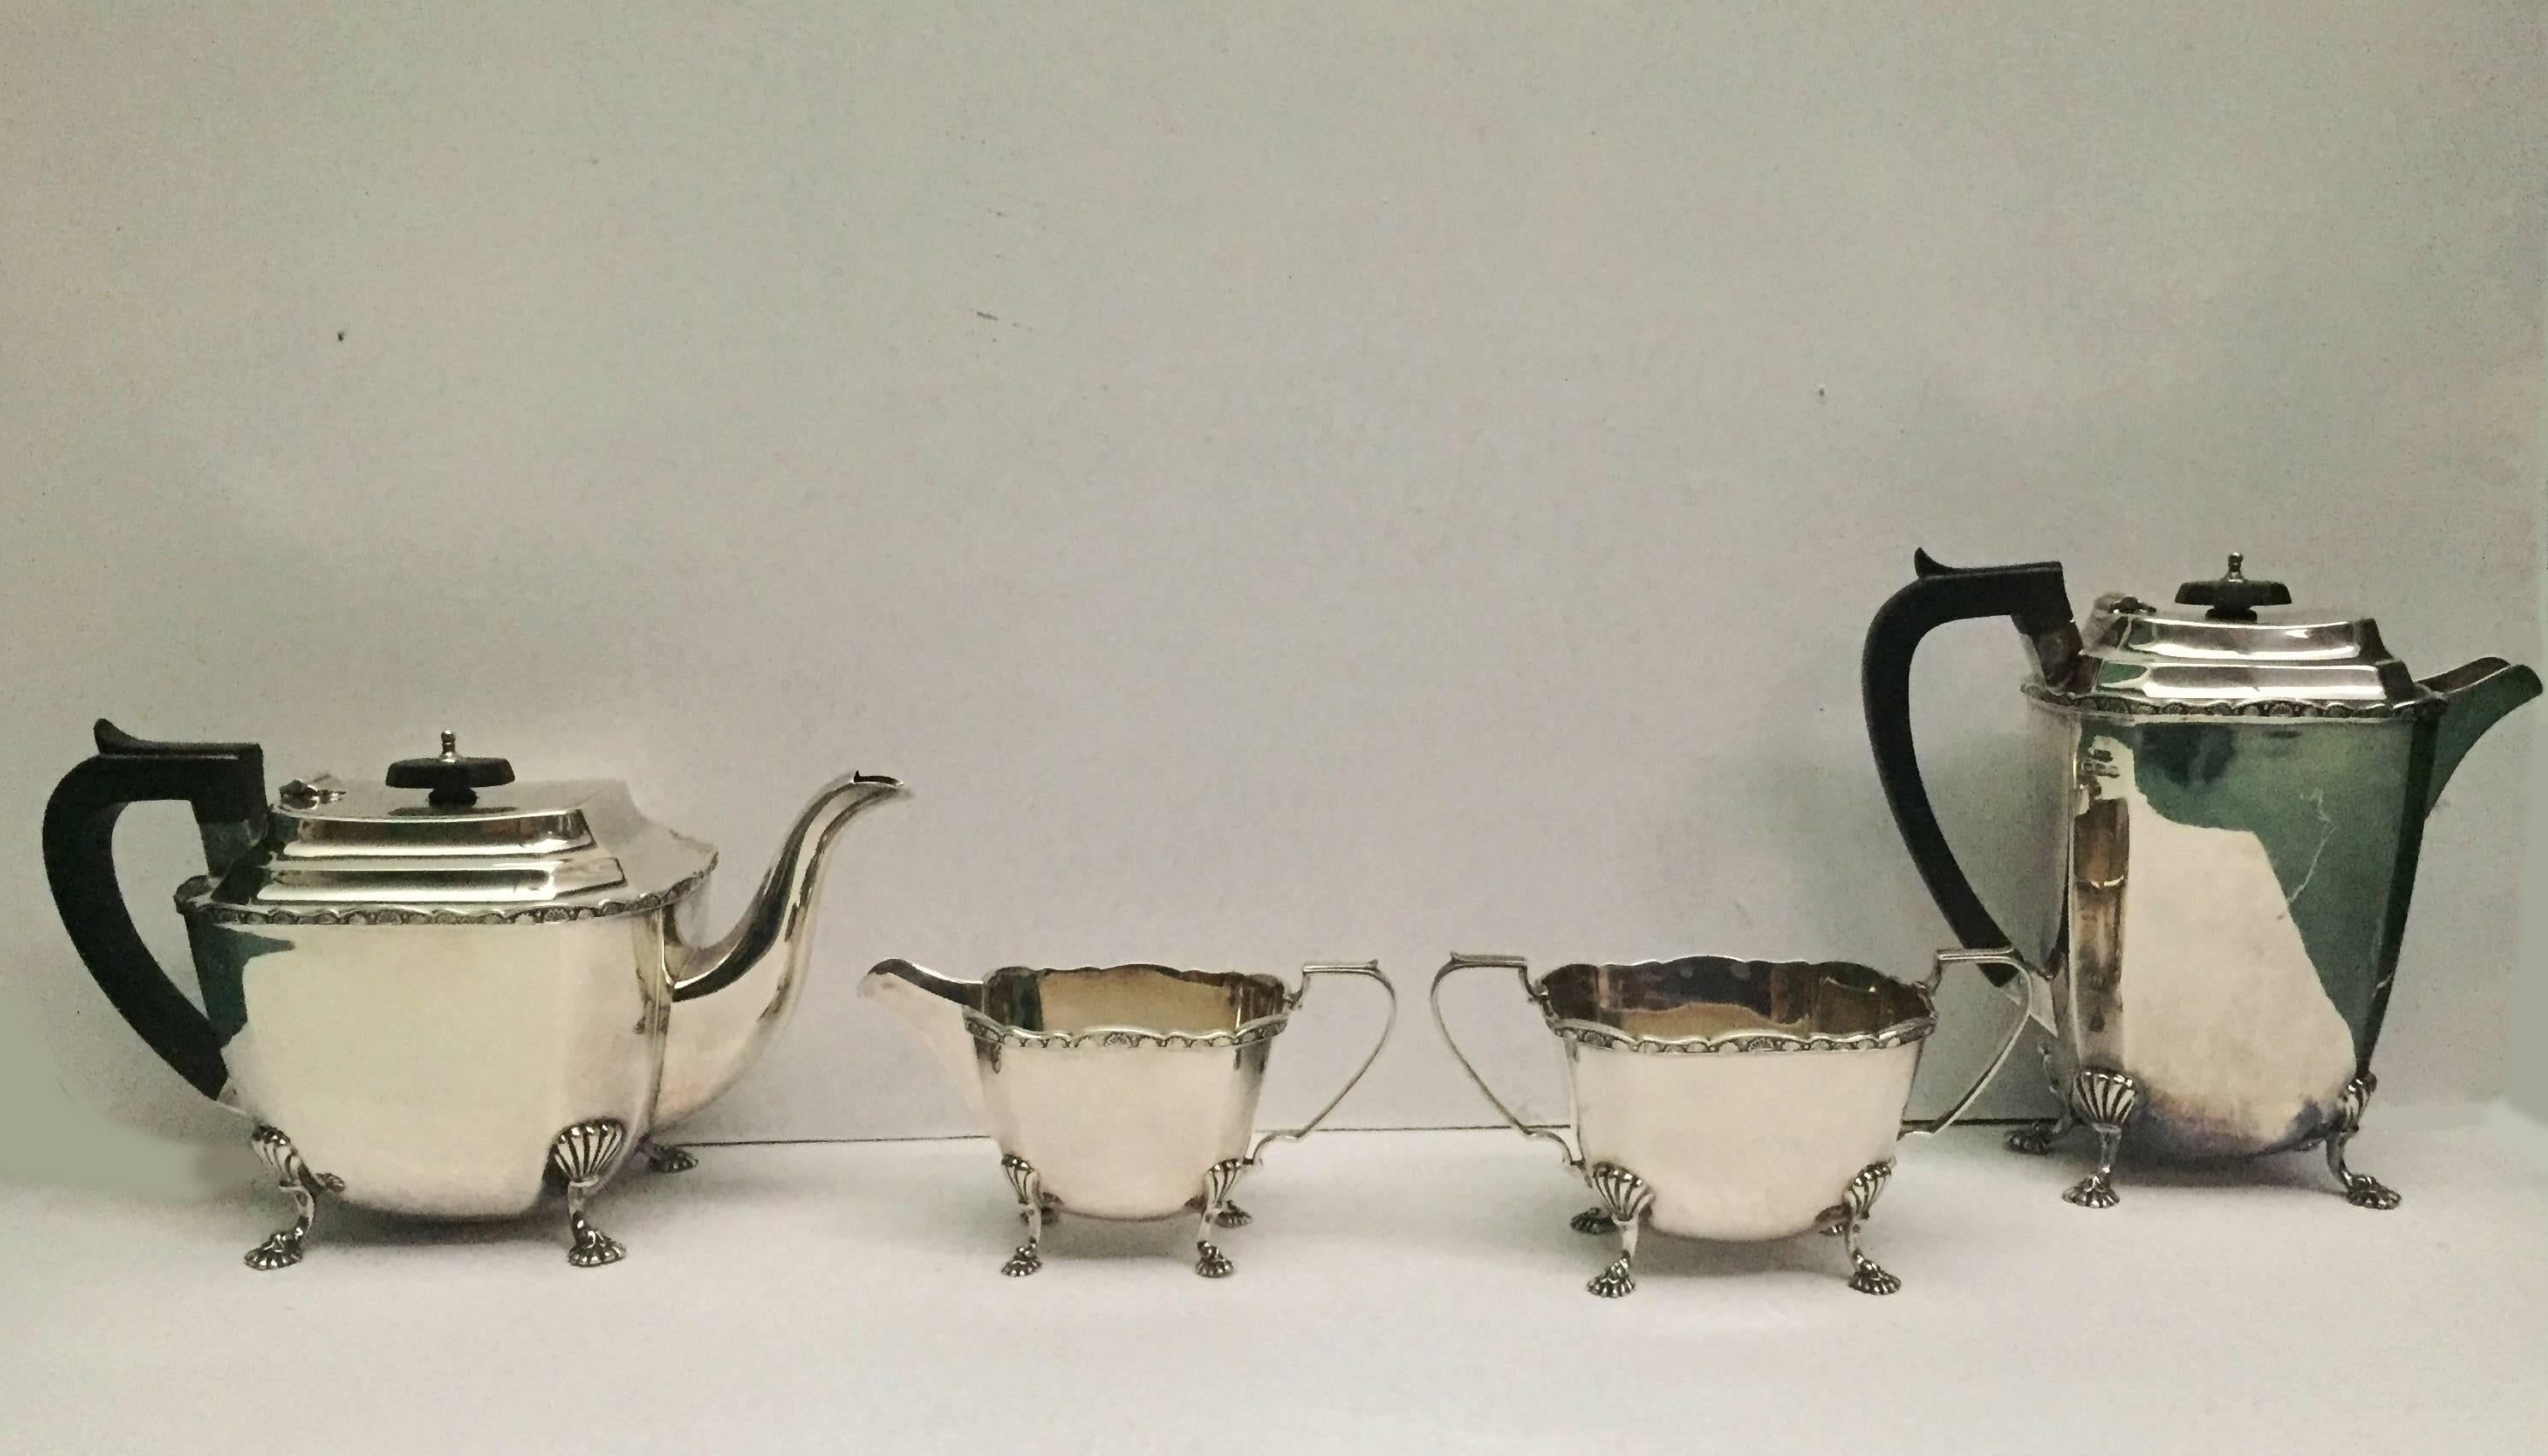 Four-piece set includes: teapot, water jug, sugar and cream.

please note: silver tray is not included in this sale. This can be bought separately for £4,500. 

Silver tray information(NOT INCLUDED):

A fine large solid silver Art Deco tray made by